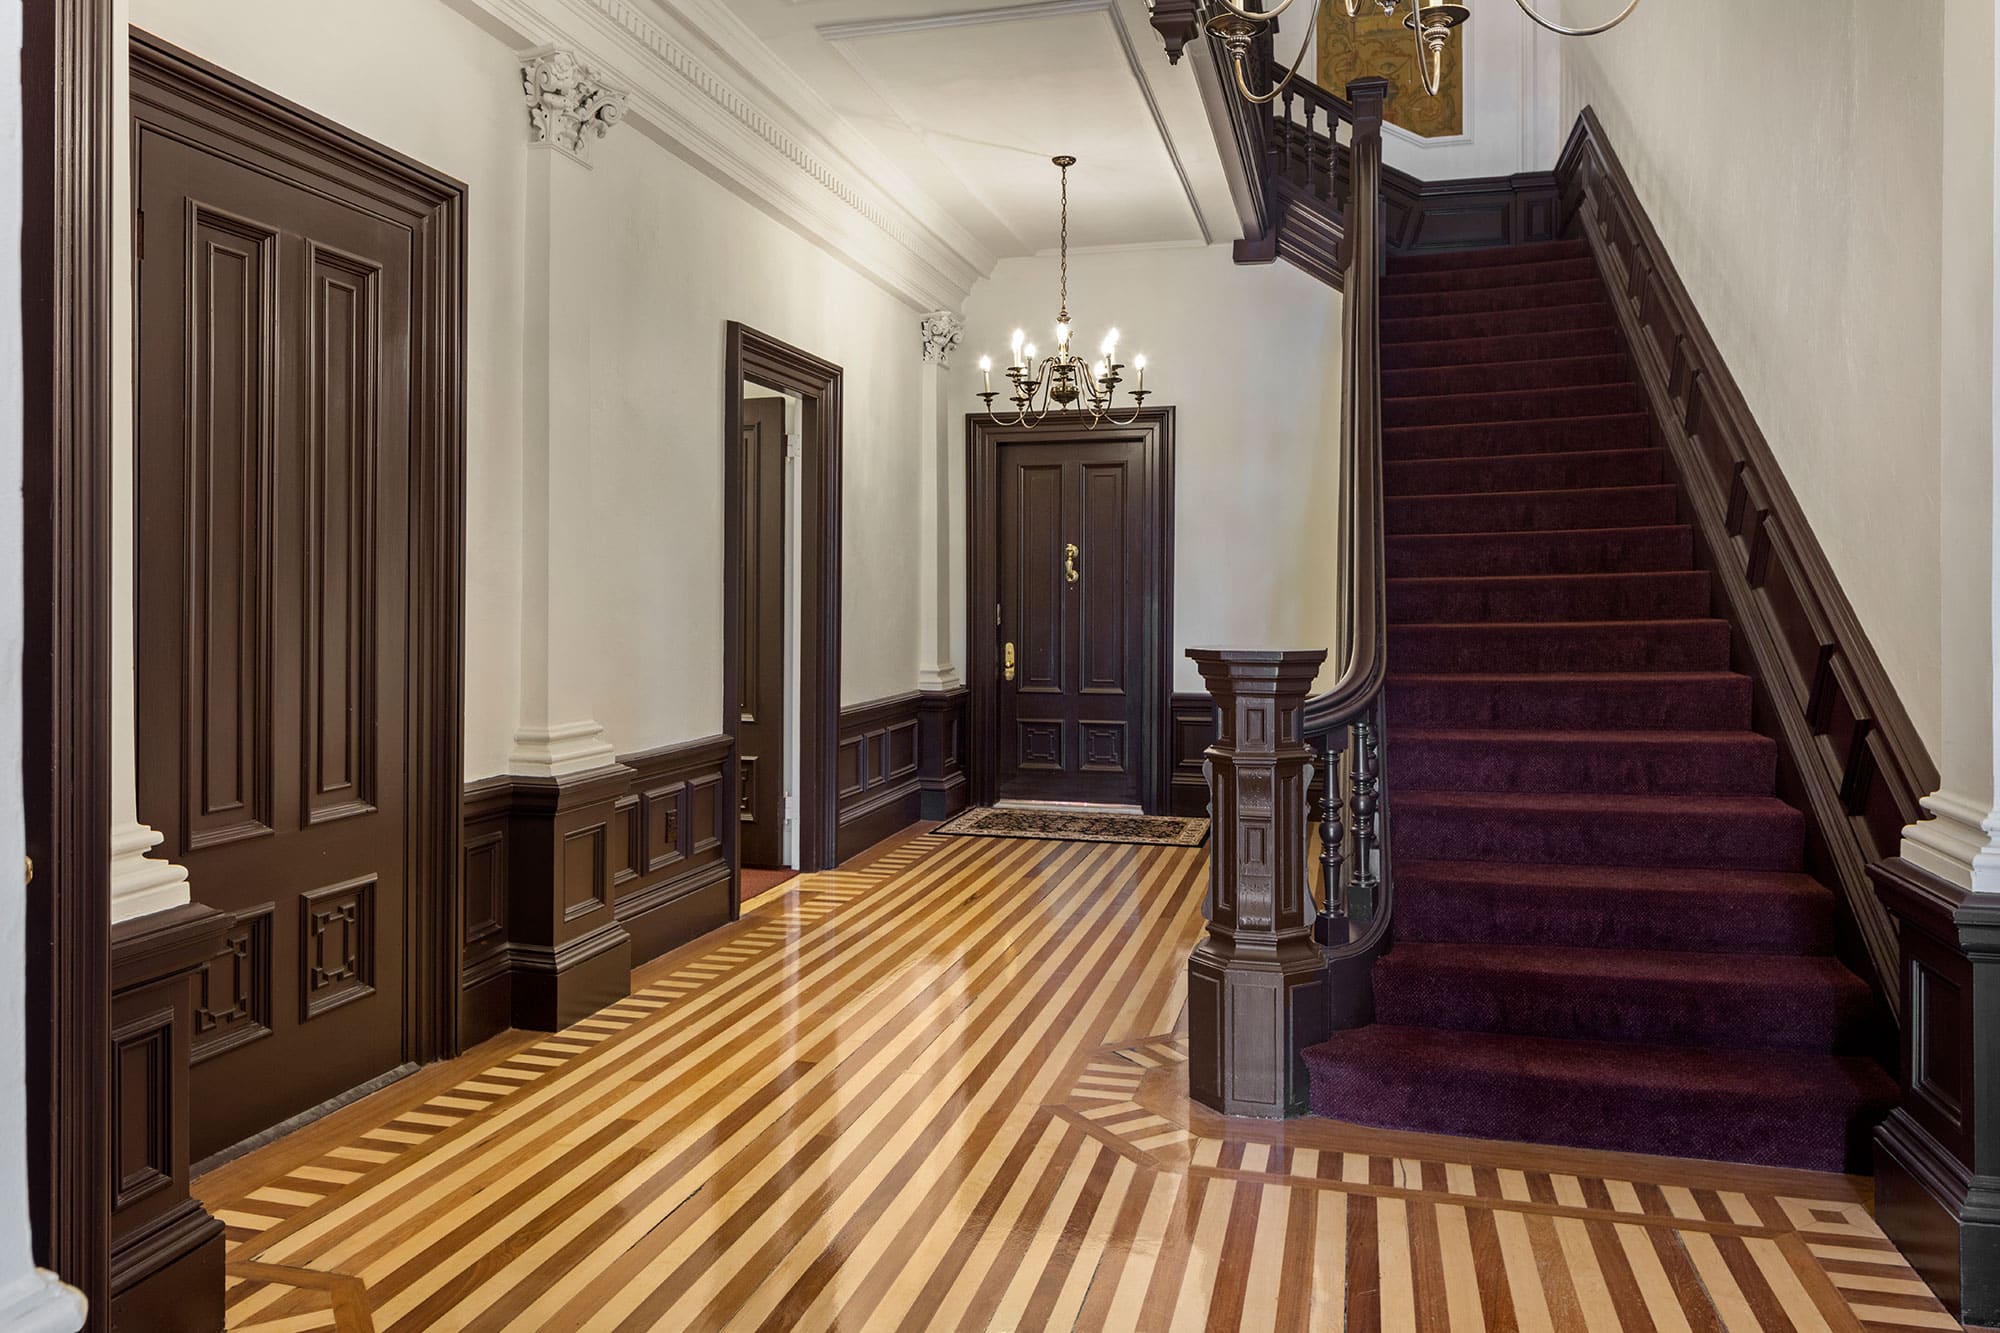 Home foyer with decorative striped wood floors and carpeted staircase